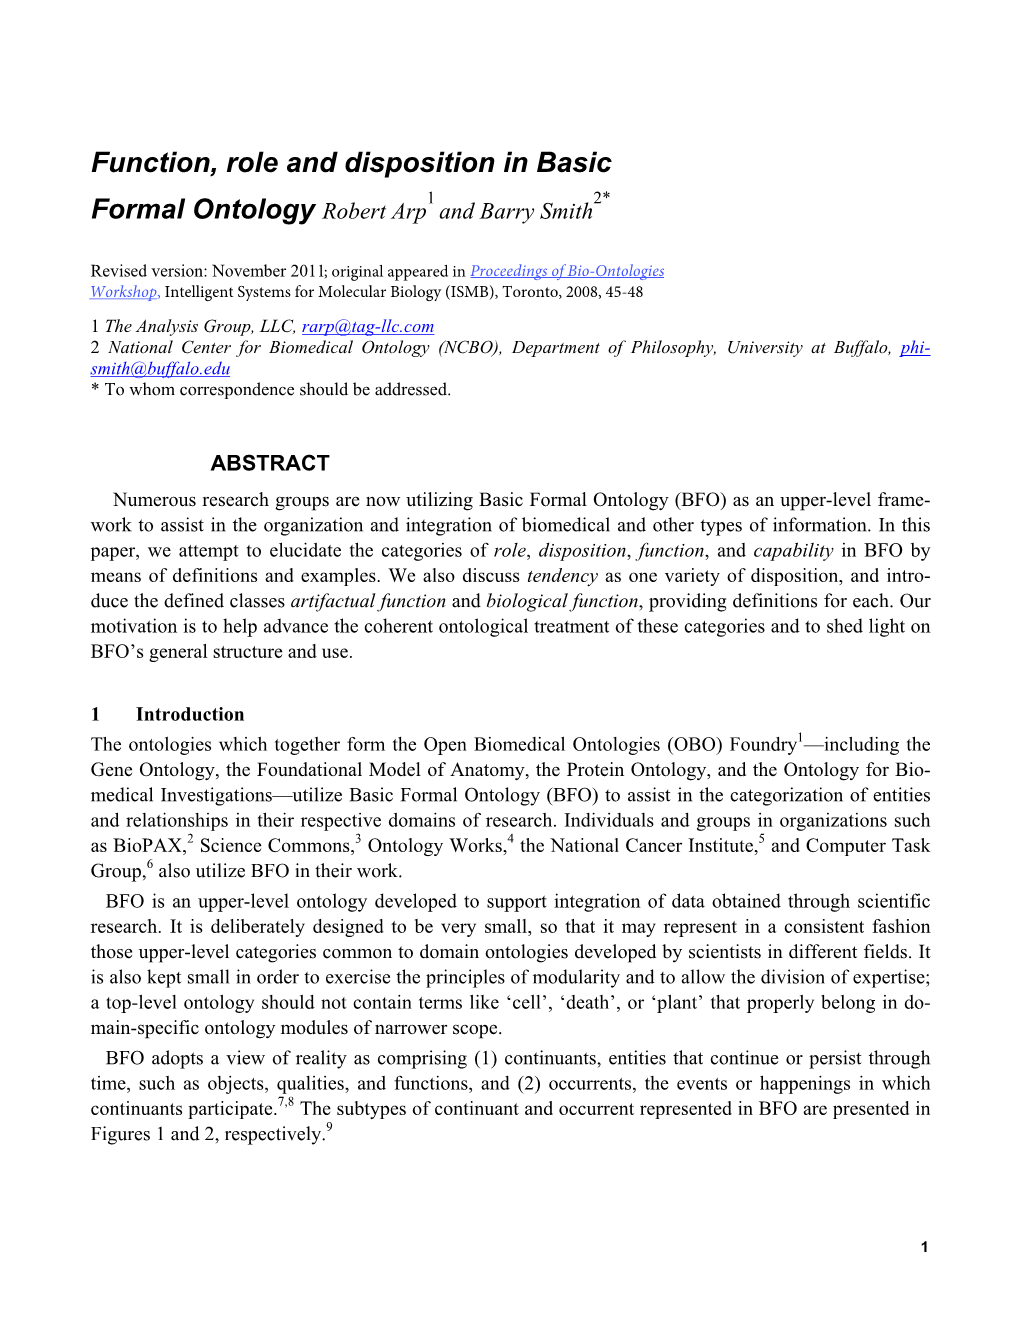 Function, Role and Disposition in Basic Formal Ontology Robert